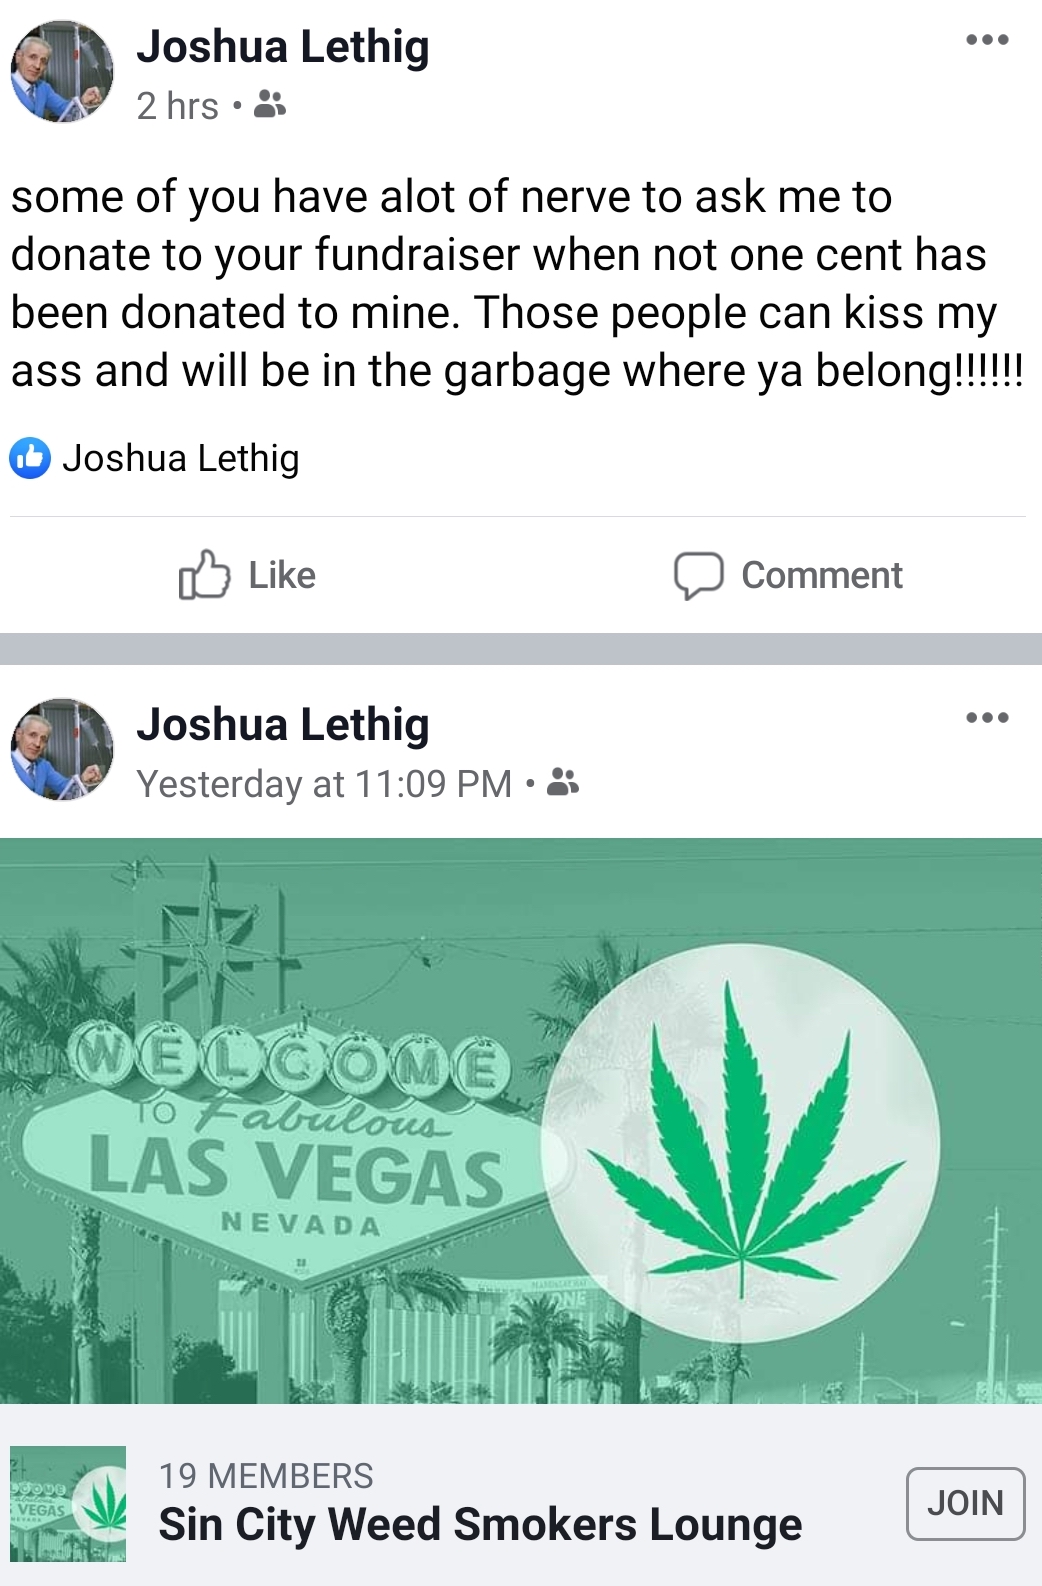 welcome to las vegas - Joshua Lethig 2 hrs. some of you have alot of nerve to ask me to donate to your fundraiser when not one cent has been donated to mine. Those people can kiss my ass and will be in the garbage where ya belong!!!!!! Joshua Lethig Comme